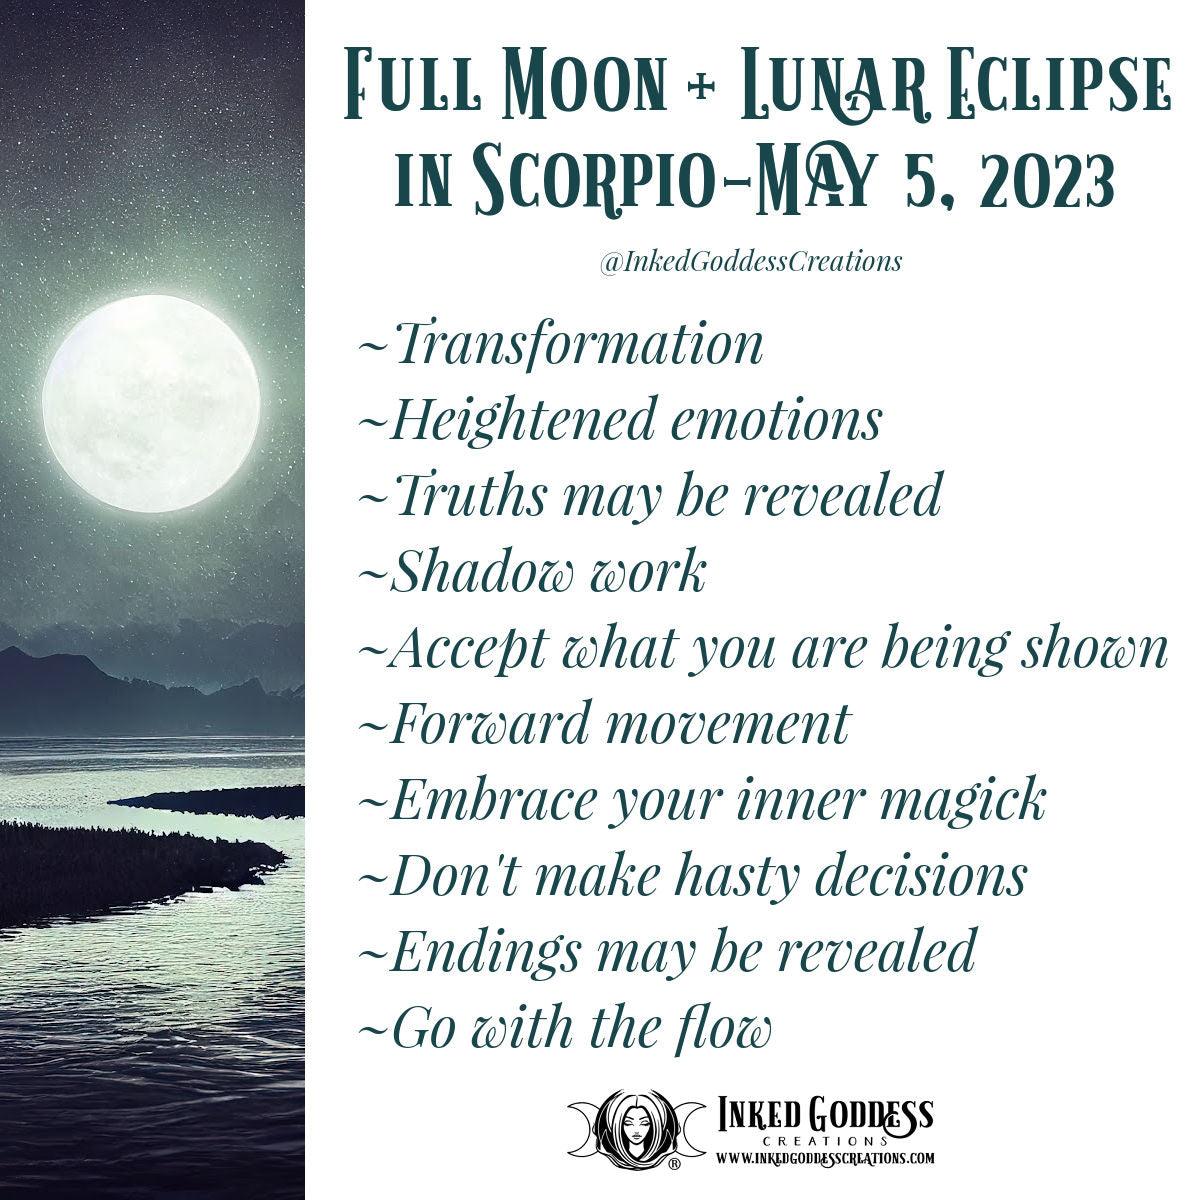 Full Moon + Lunar Eclipse in Scorpio- May 5, 2023- Inked Goddess Creations